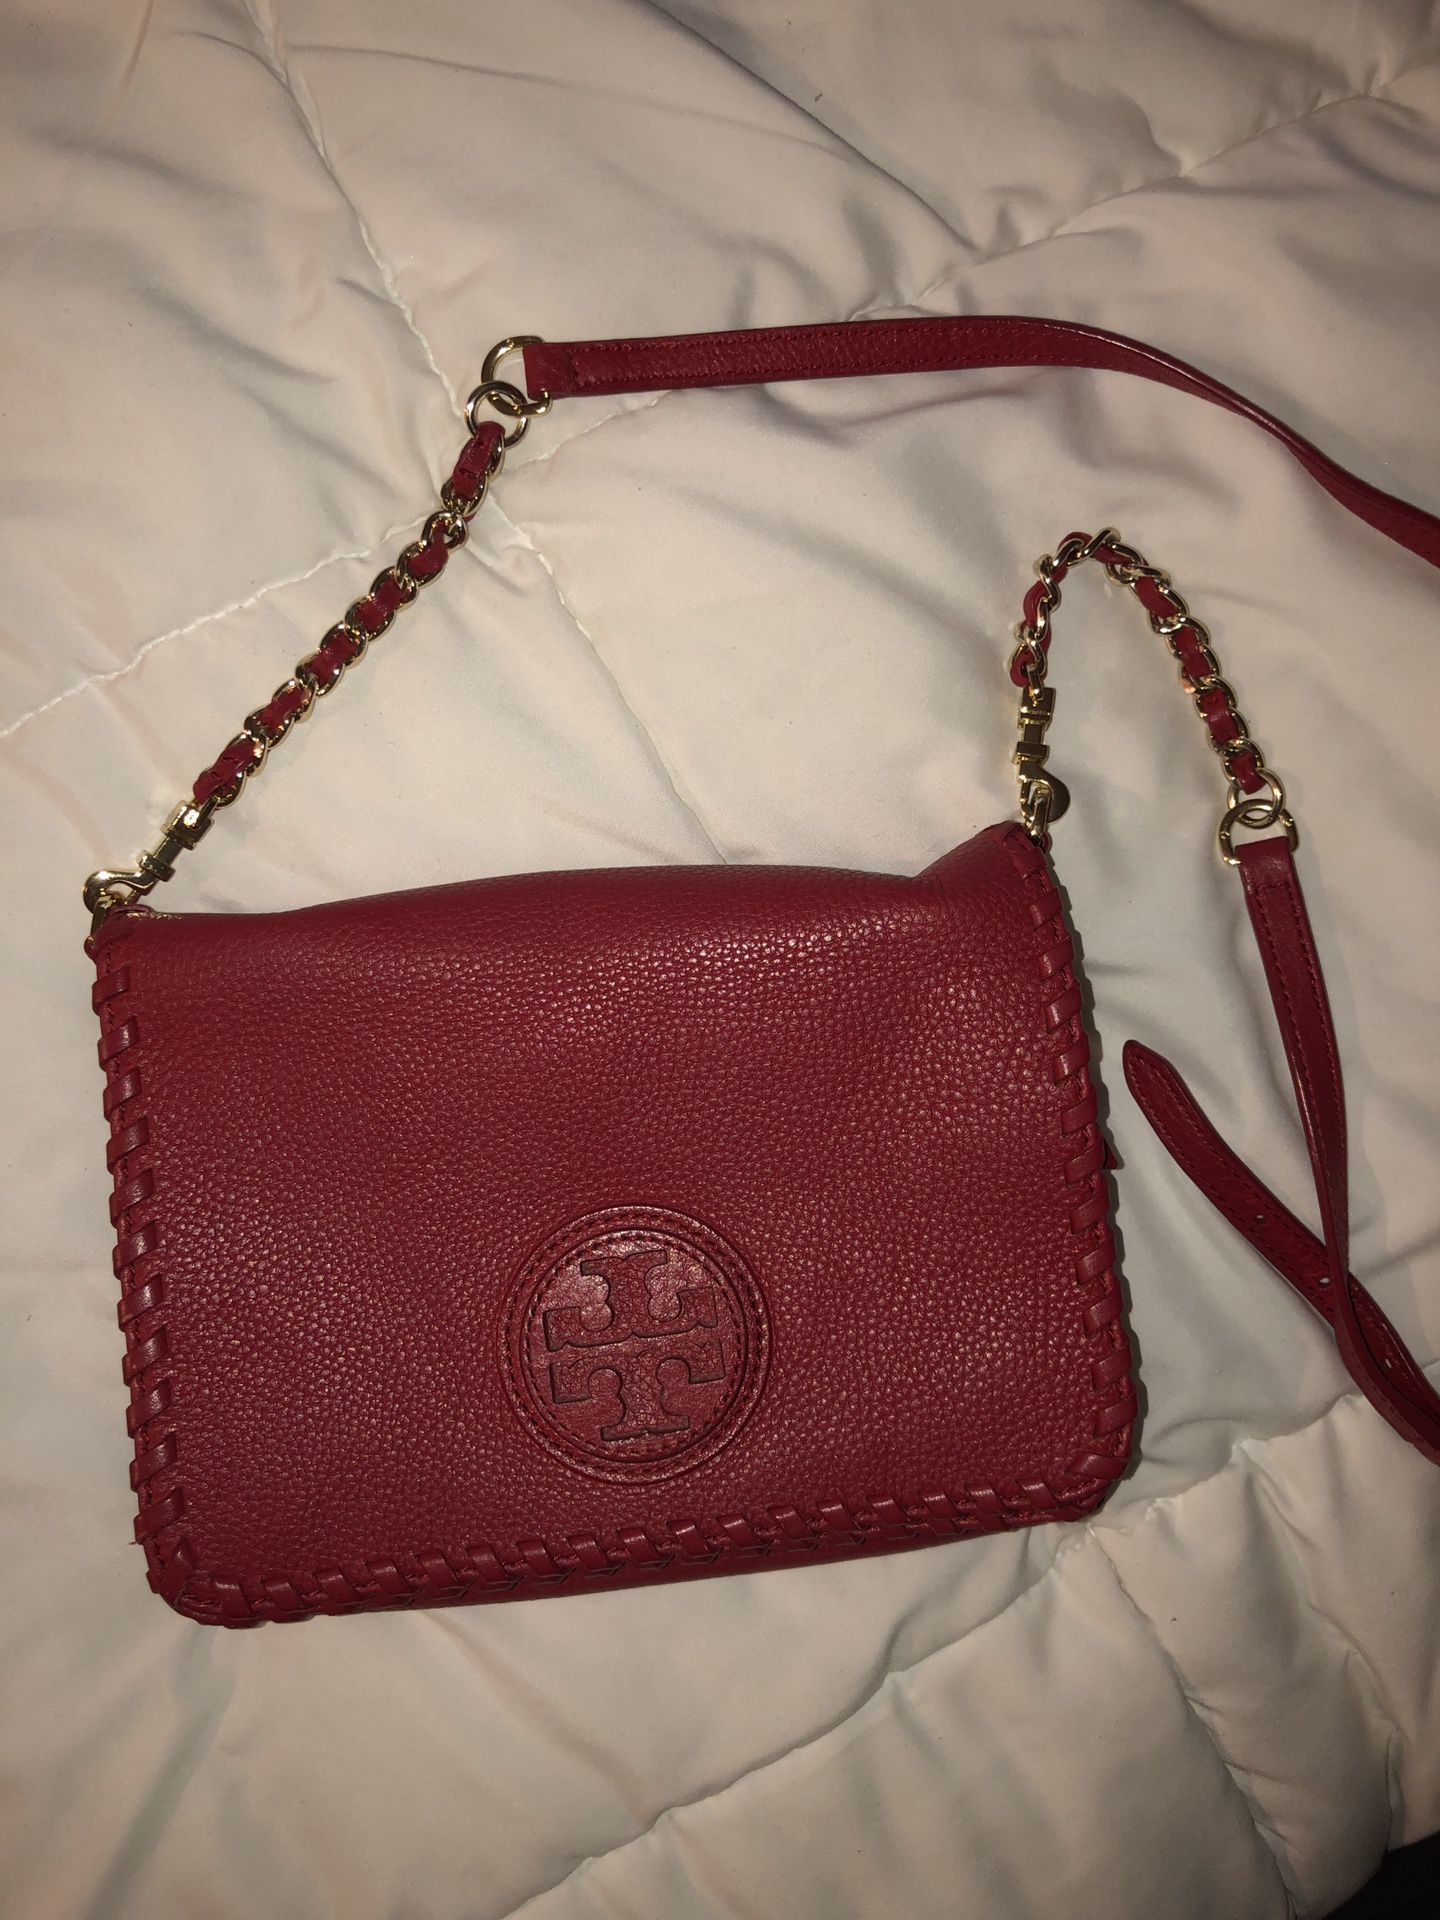 Tory Burch crossbody with gold hardware